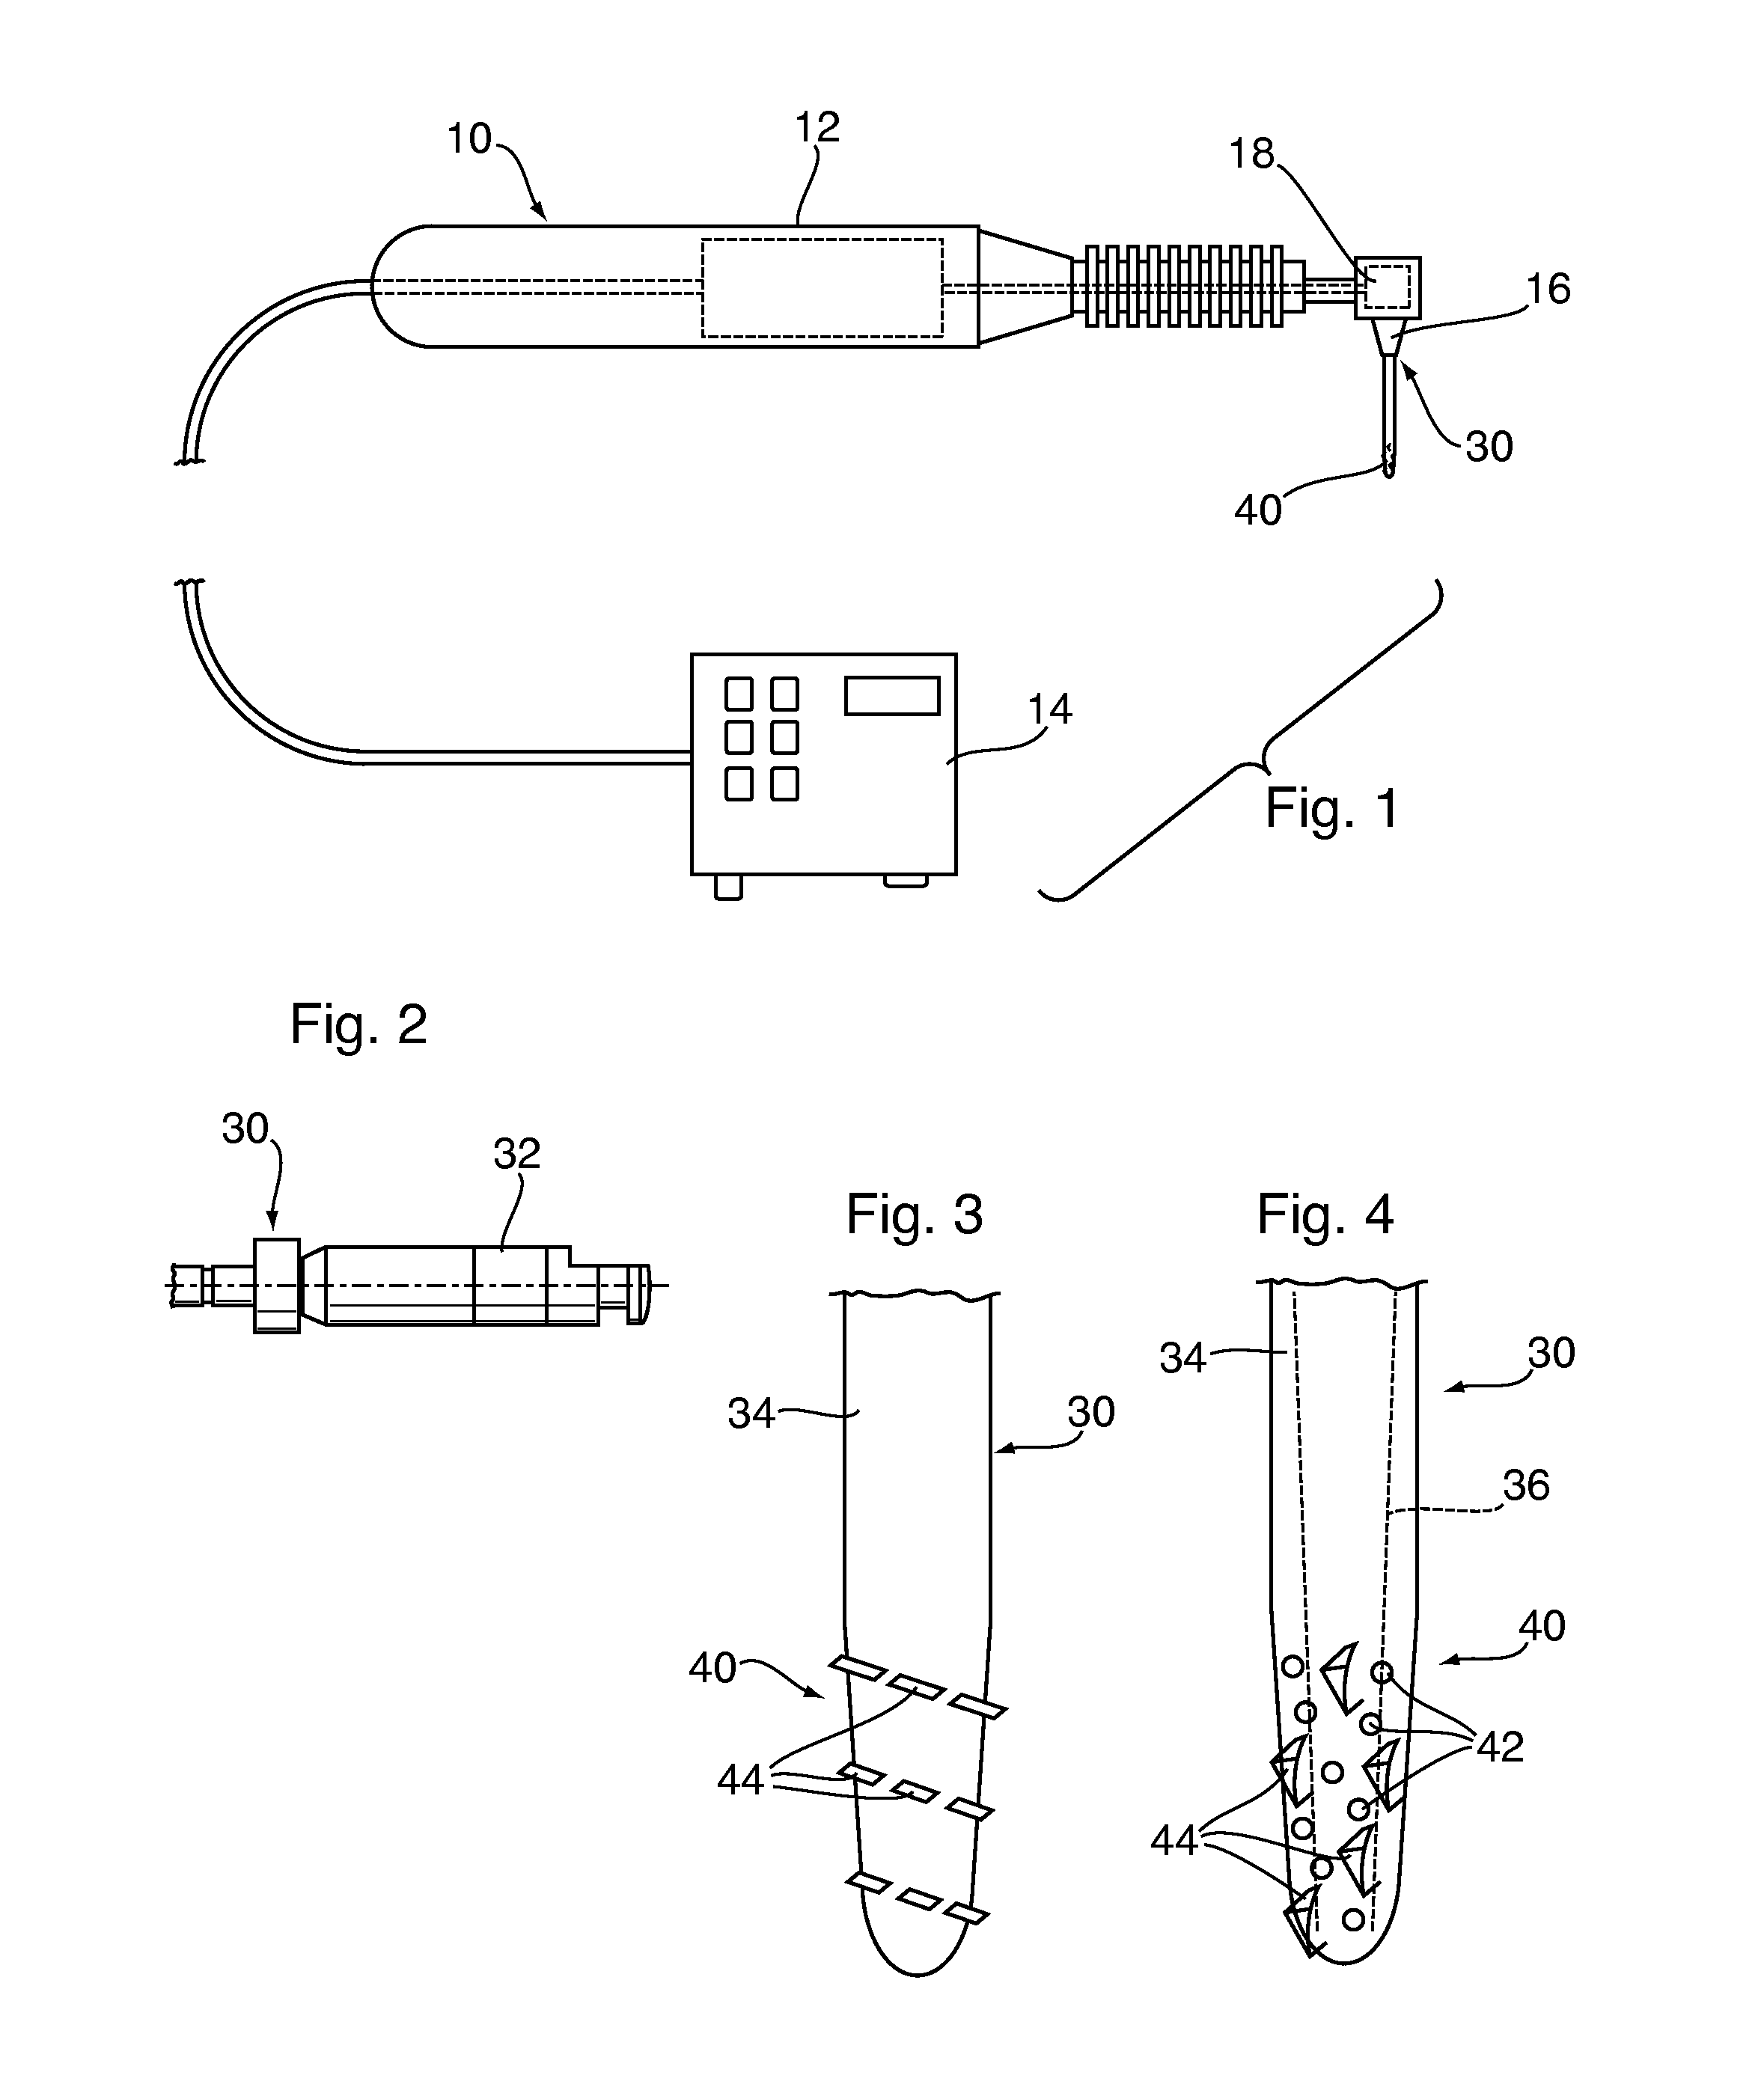 Endodontic cleaning instrument and apparatus